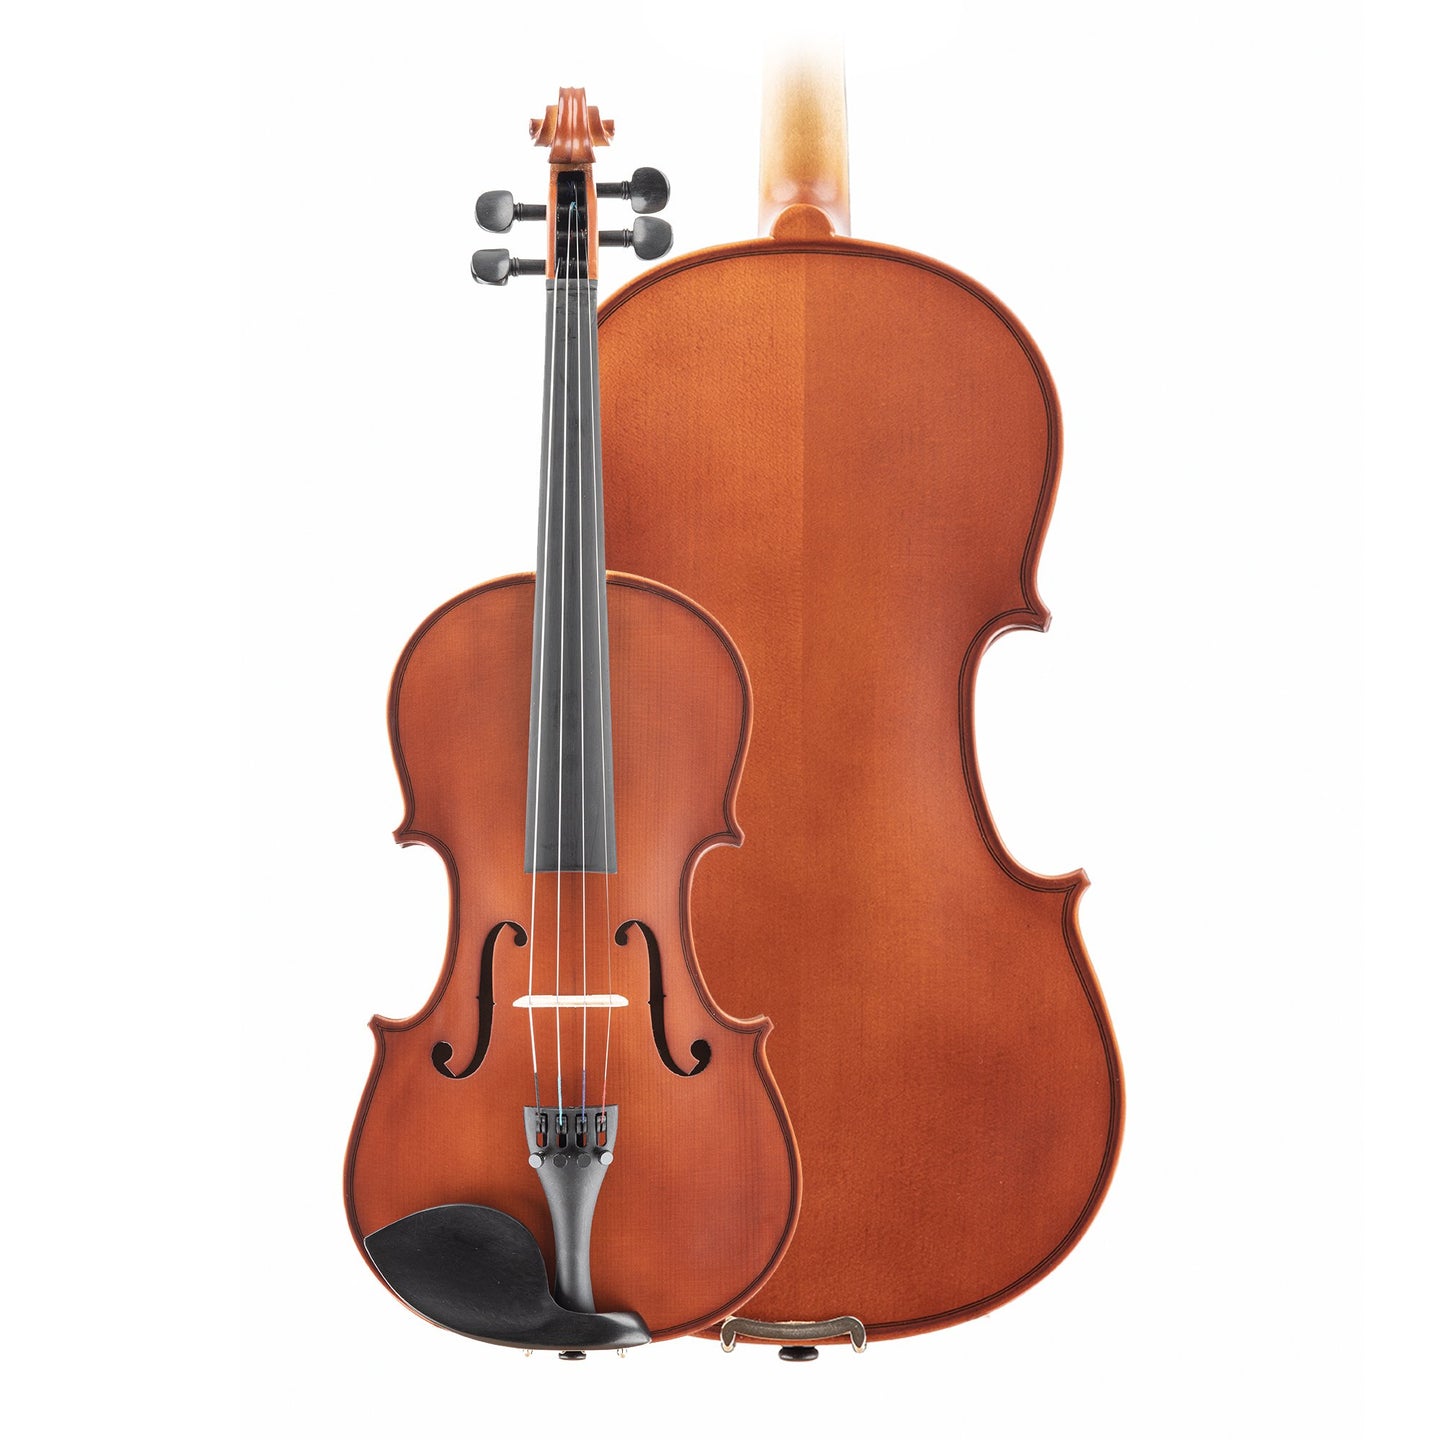 Lombardo Avance I violin top and back with ebony fittings and carbon fiber tailpiece